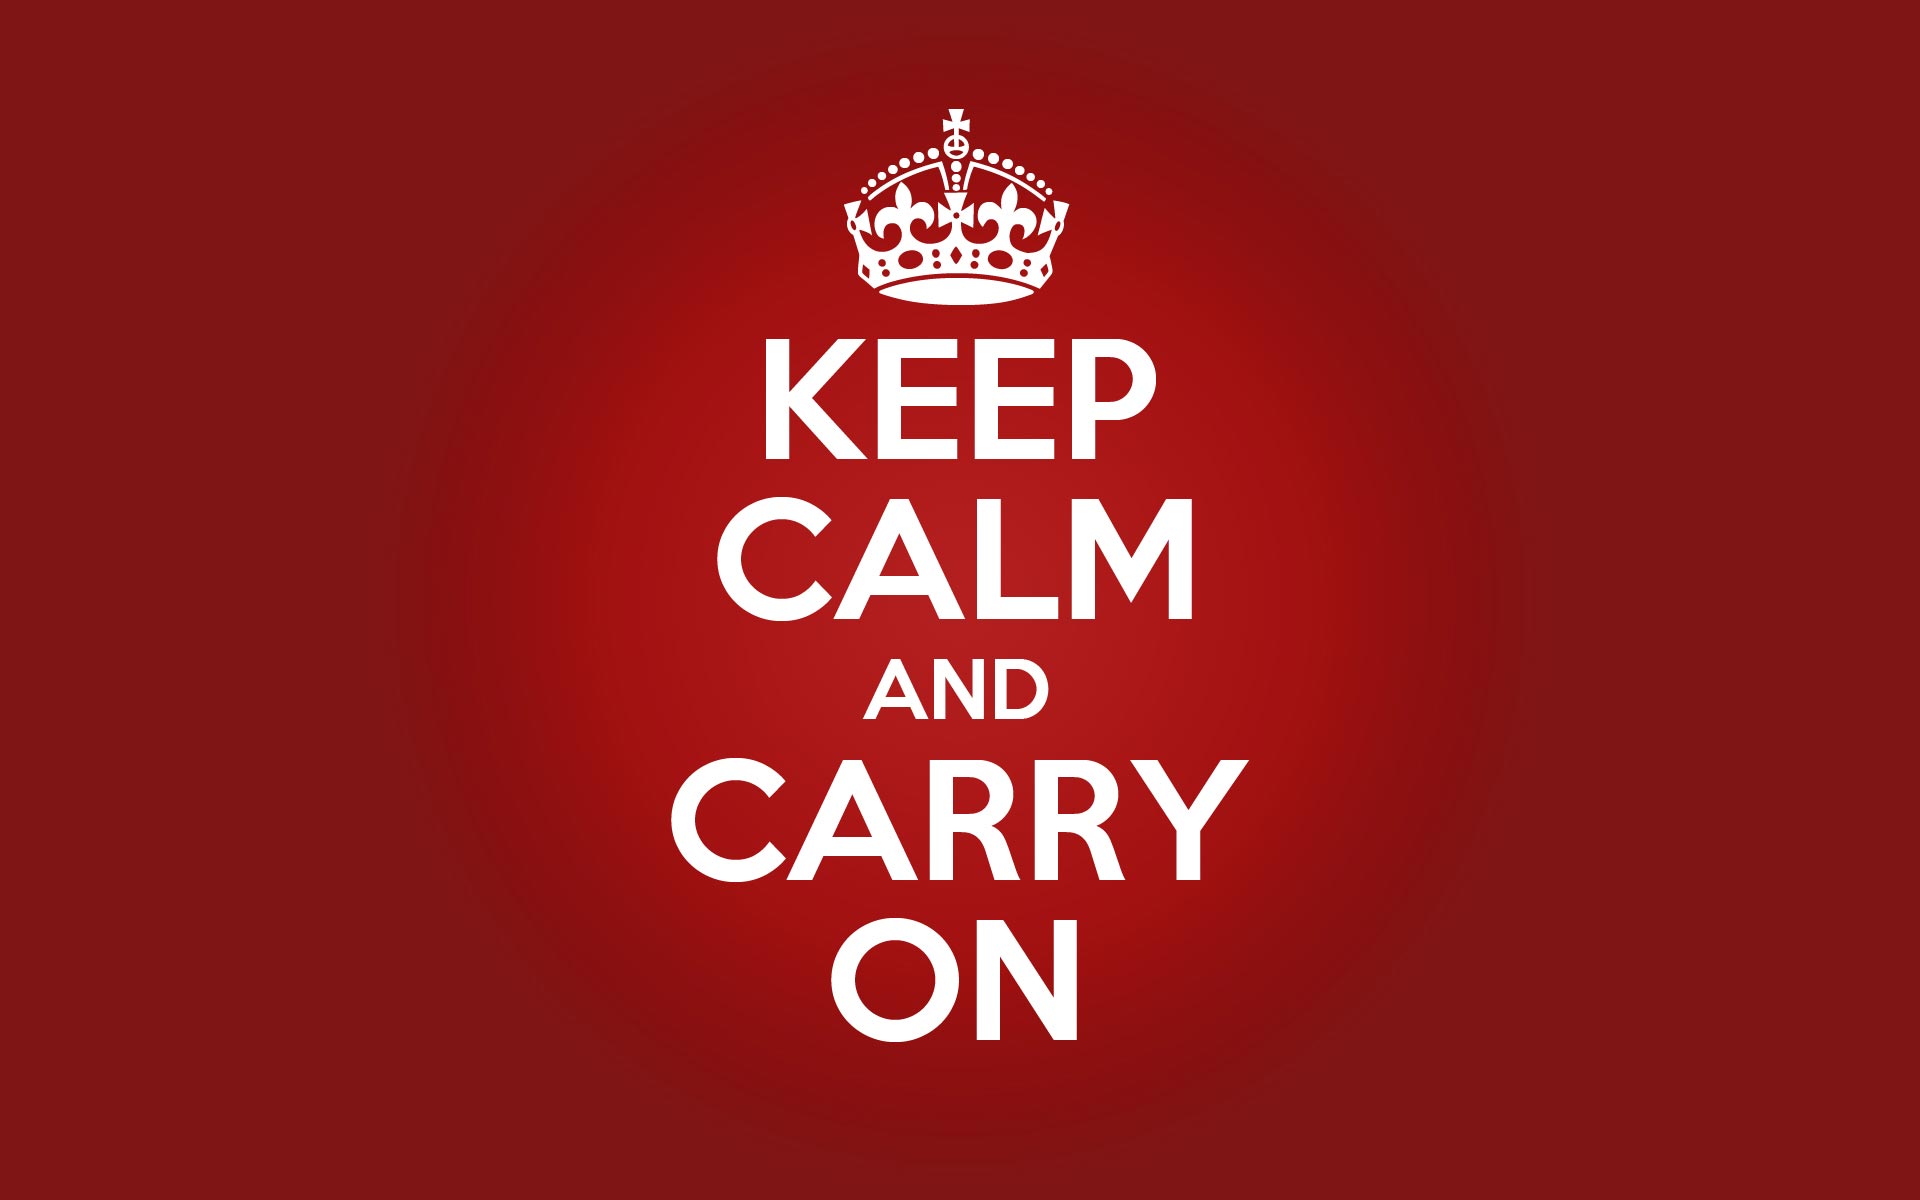 Keep Calm and Carry On - Vetor